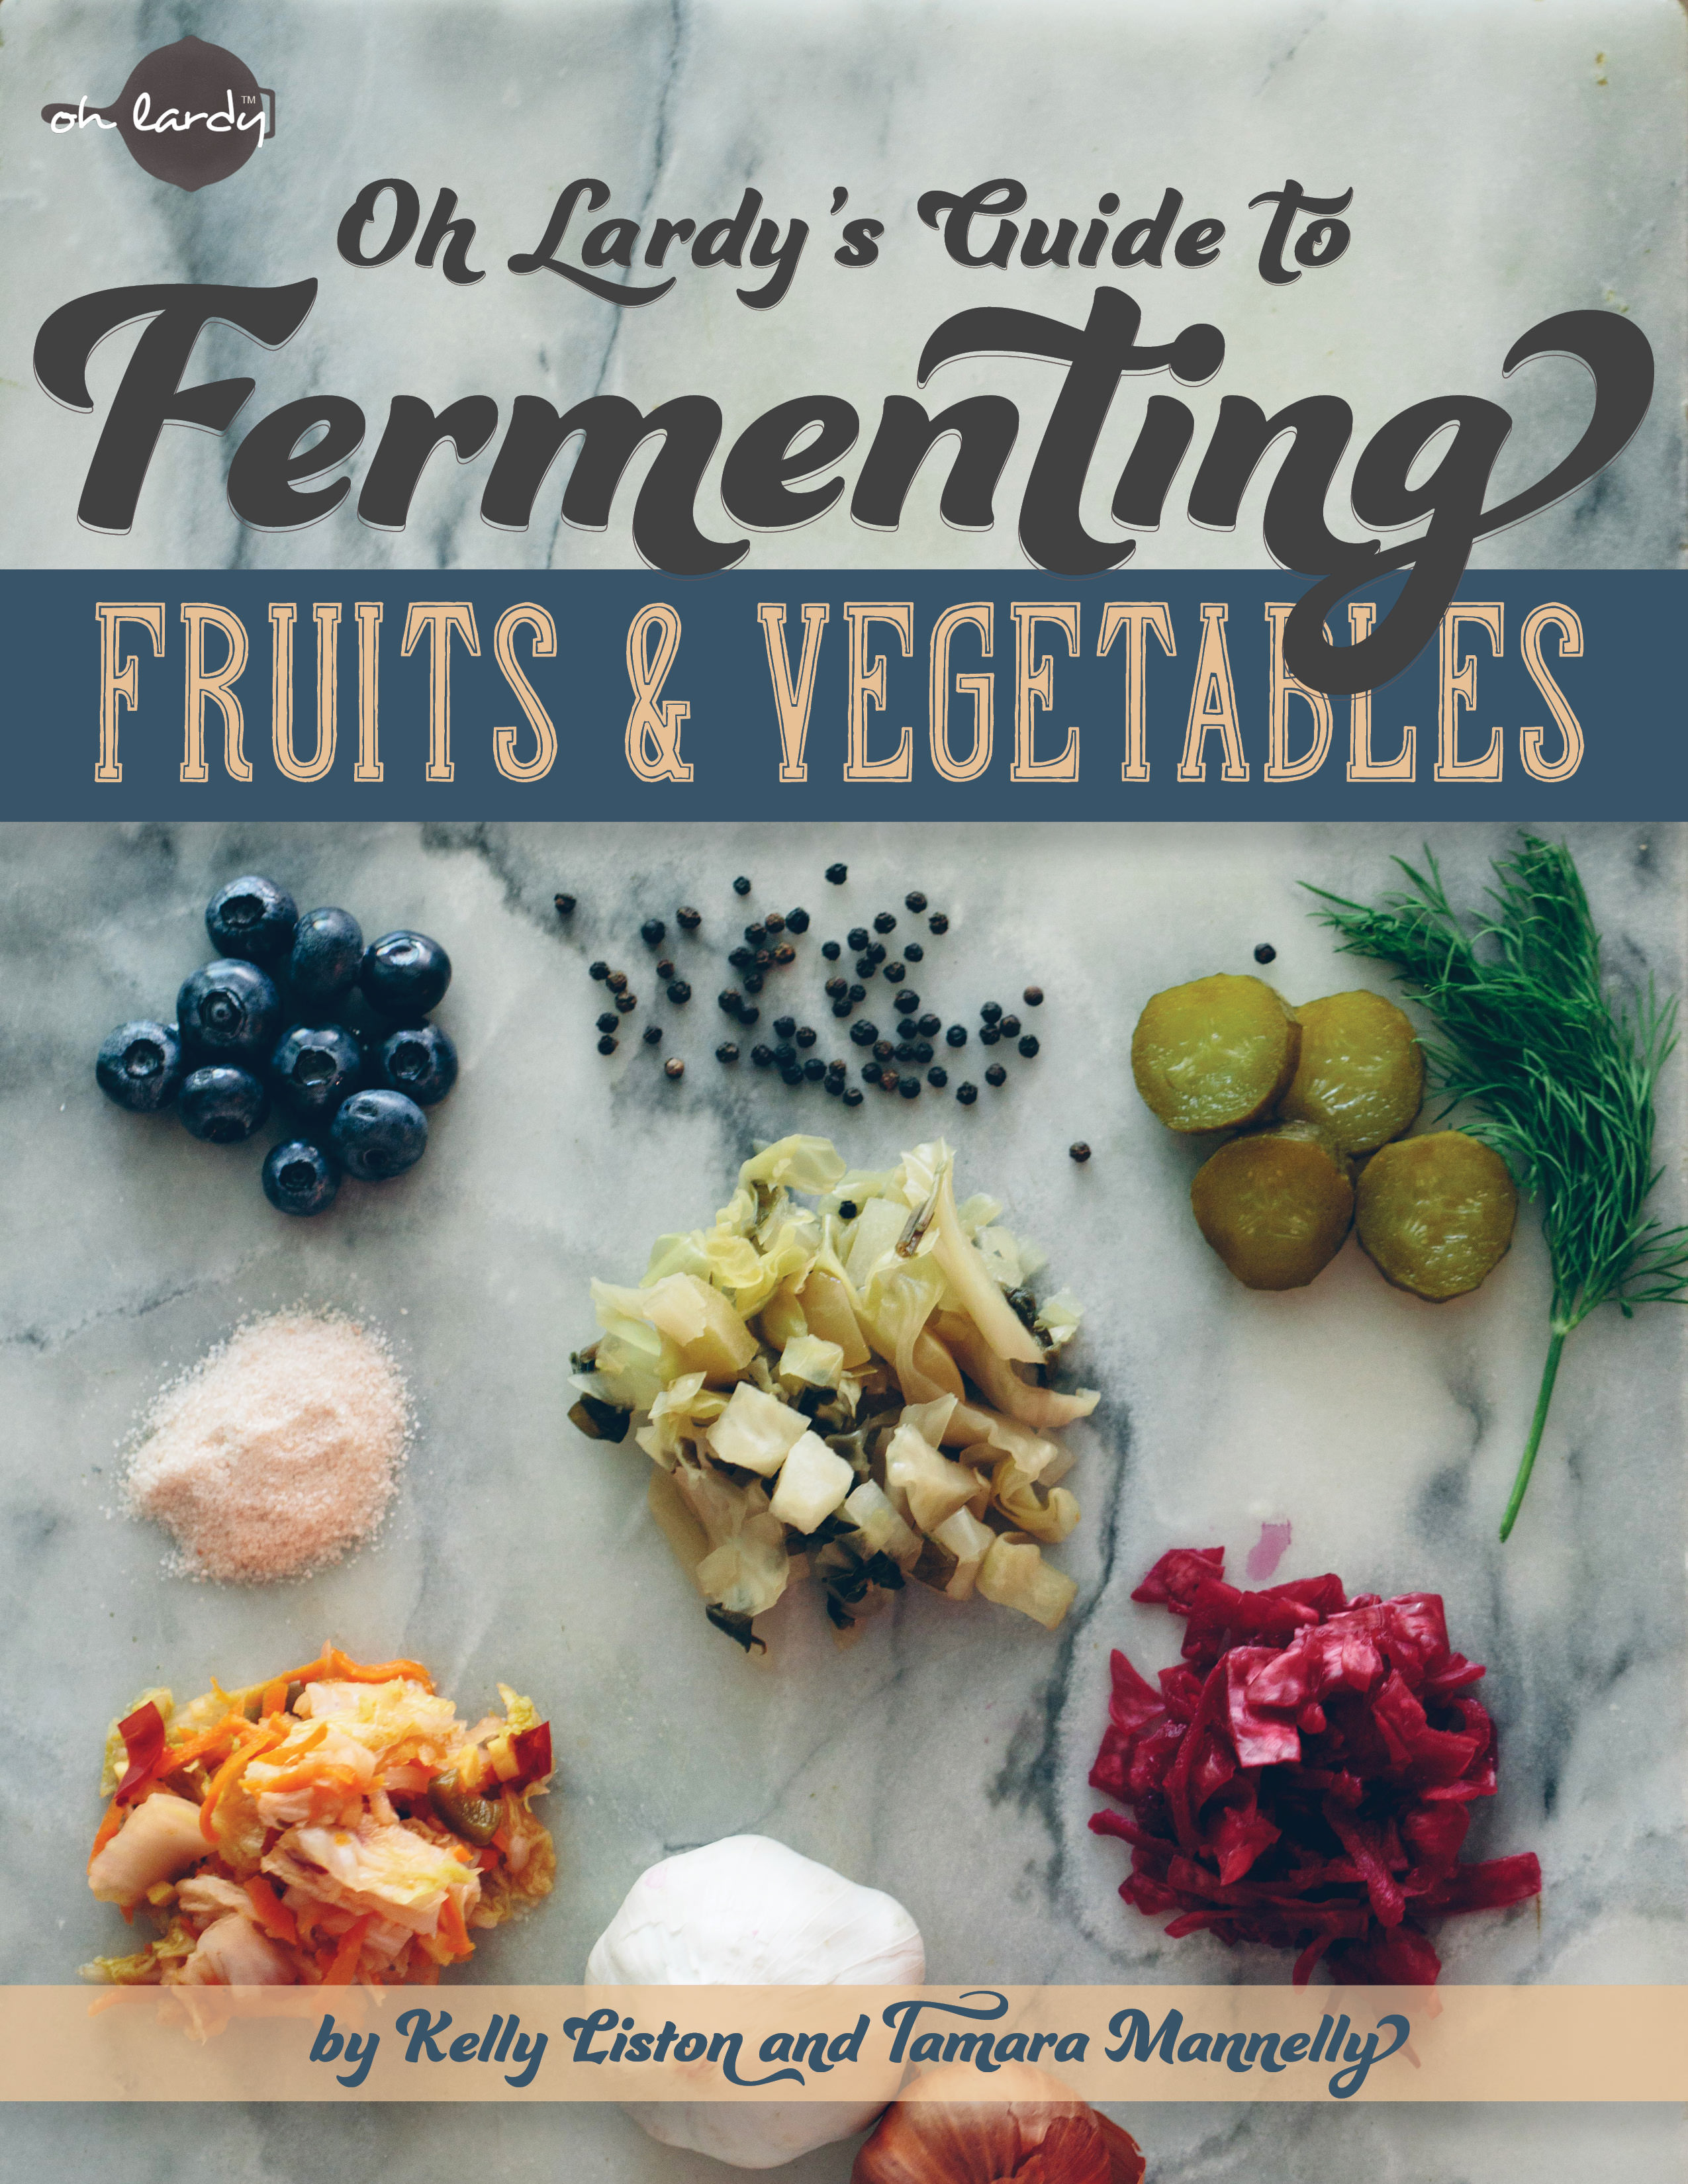 Oh Lardy's Guide to Fermenting Fruits and Vegetables